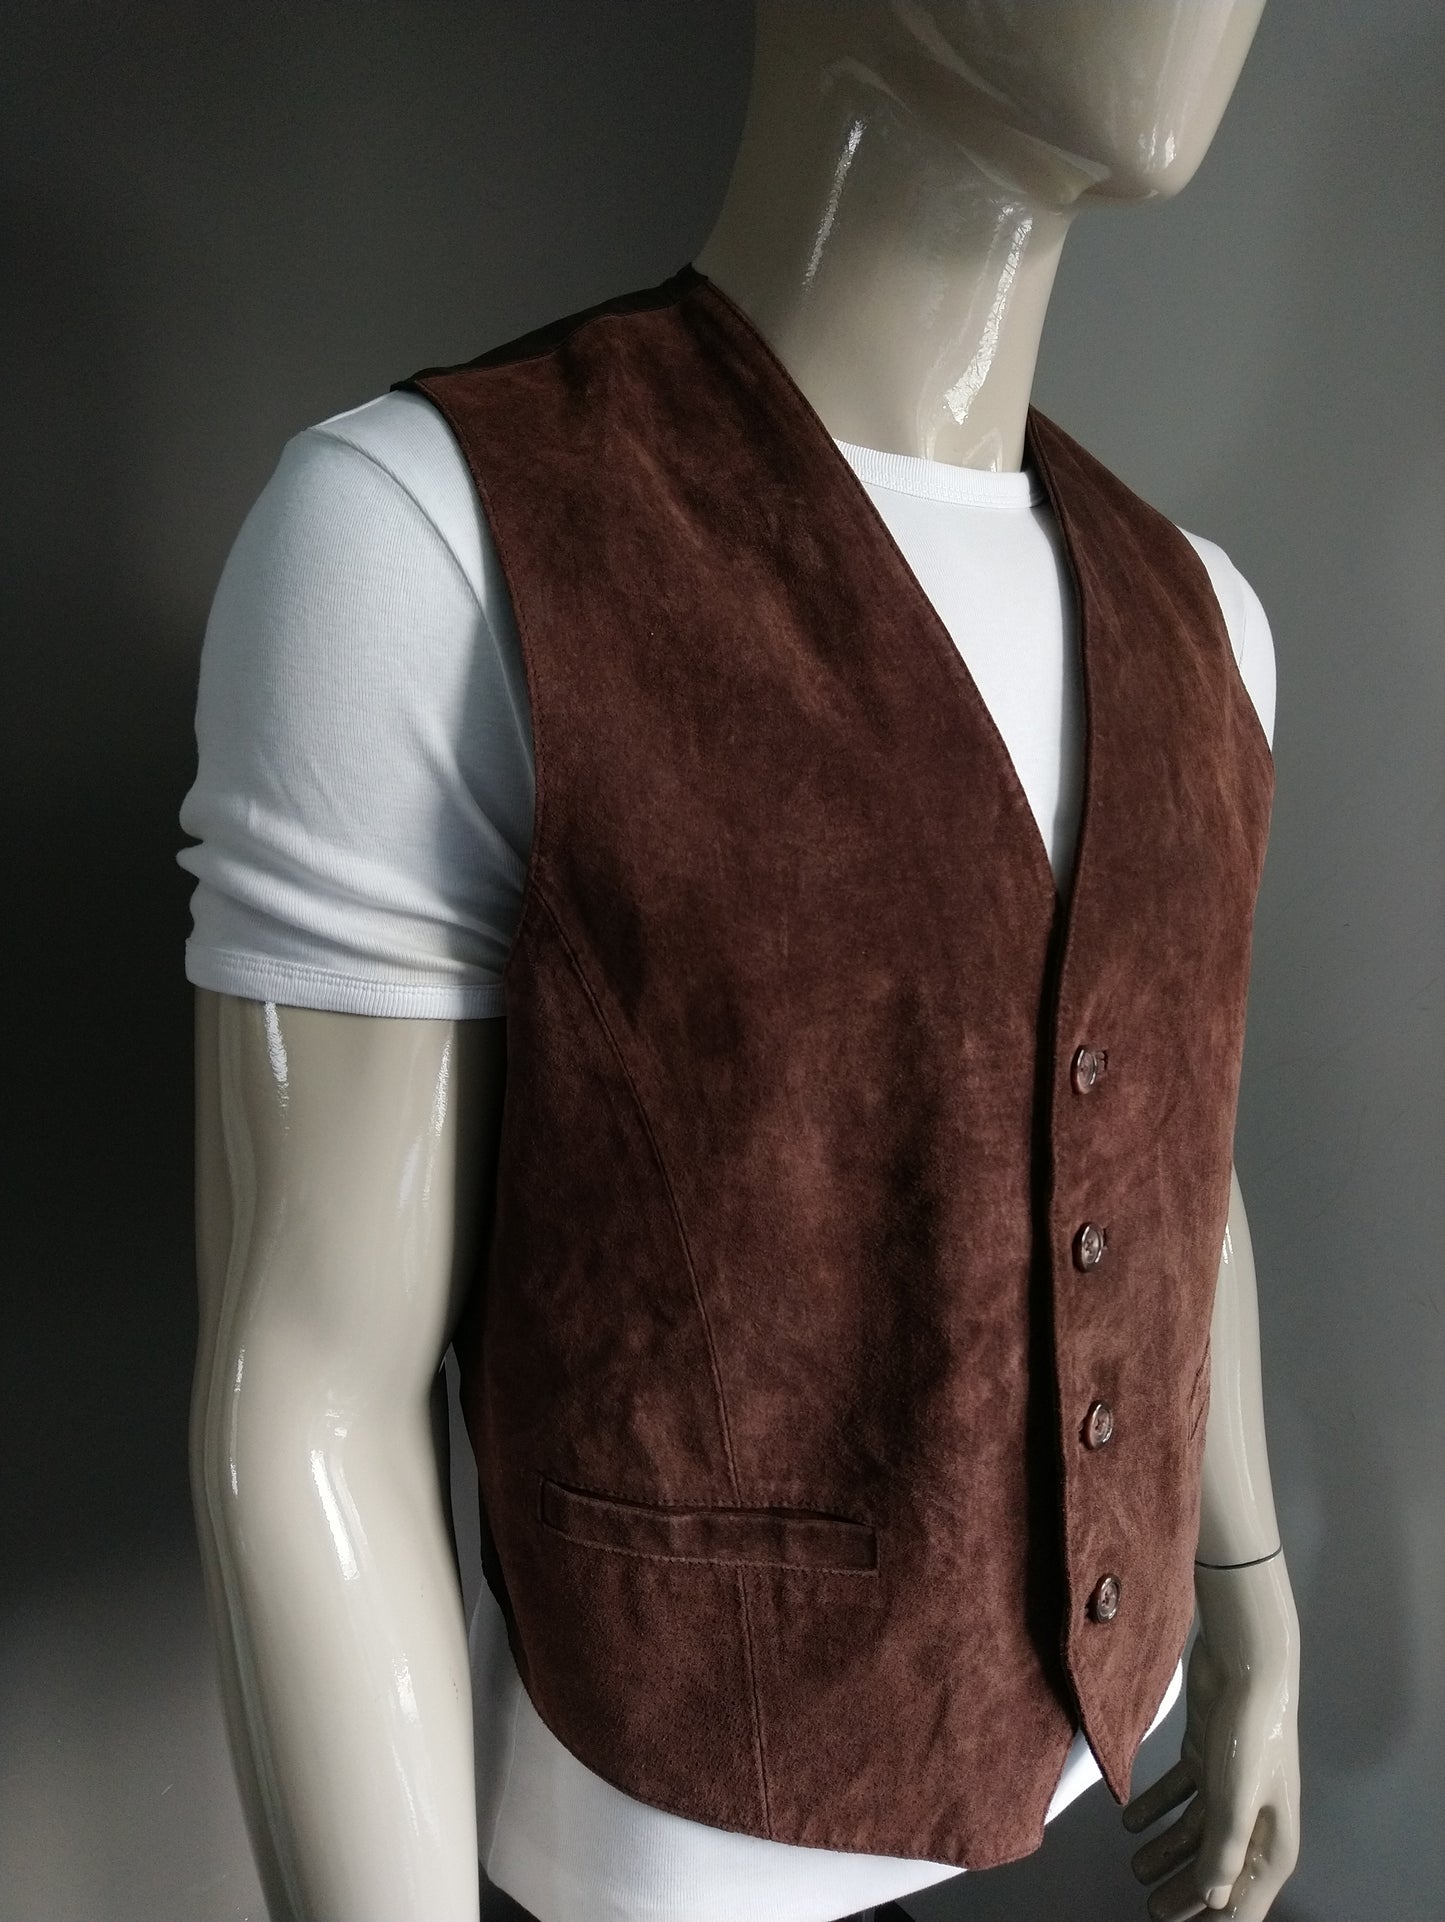 Pork leather waistcoat. Brown colored. Size M. #308.